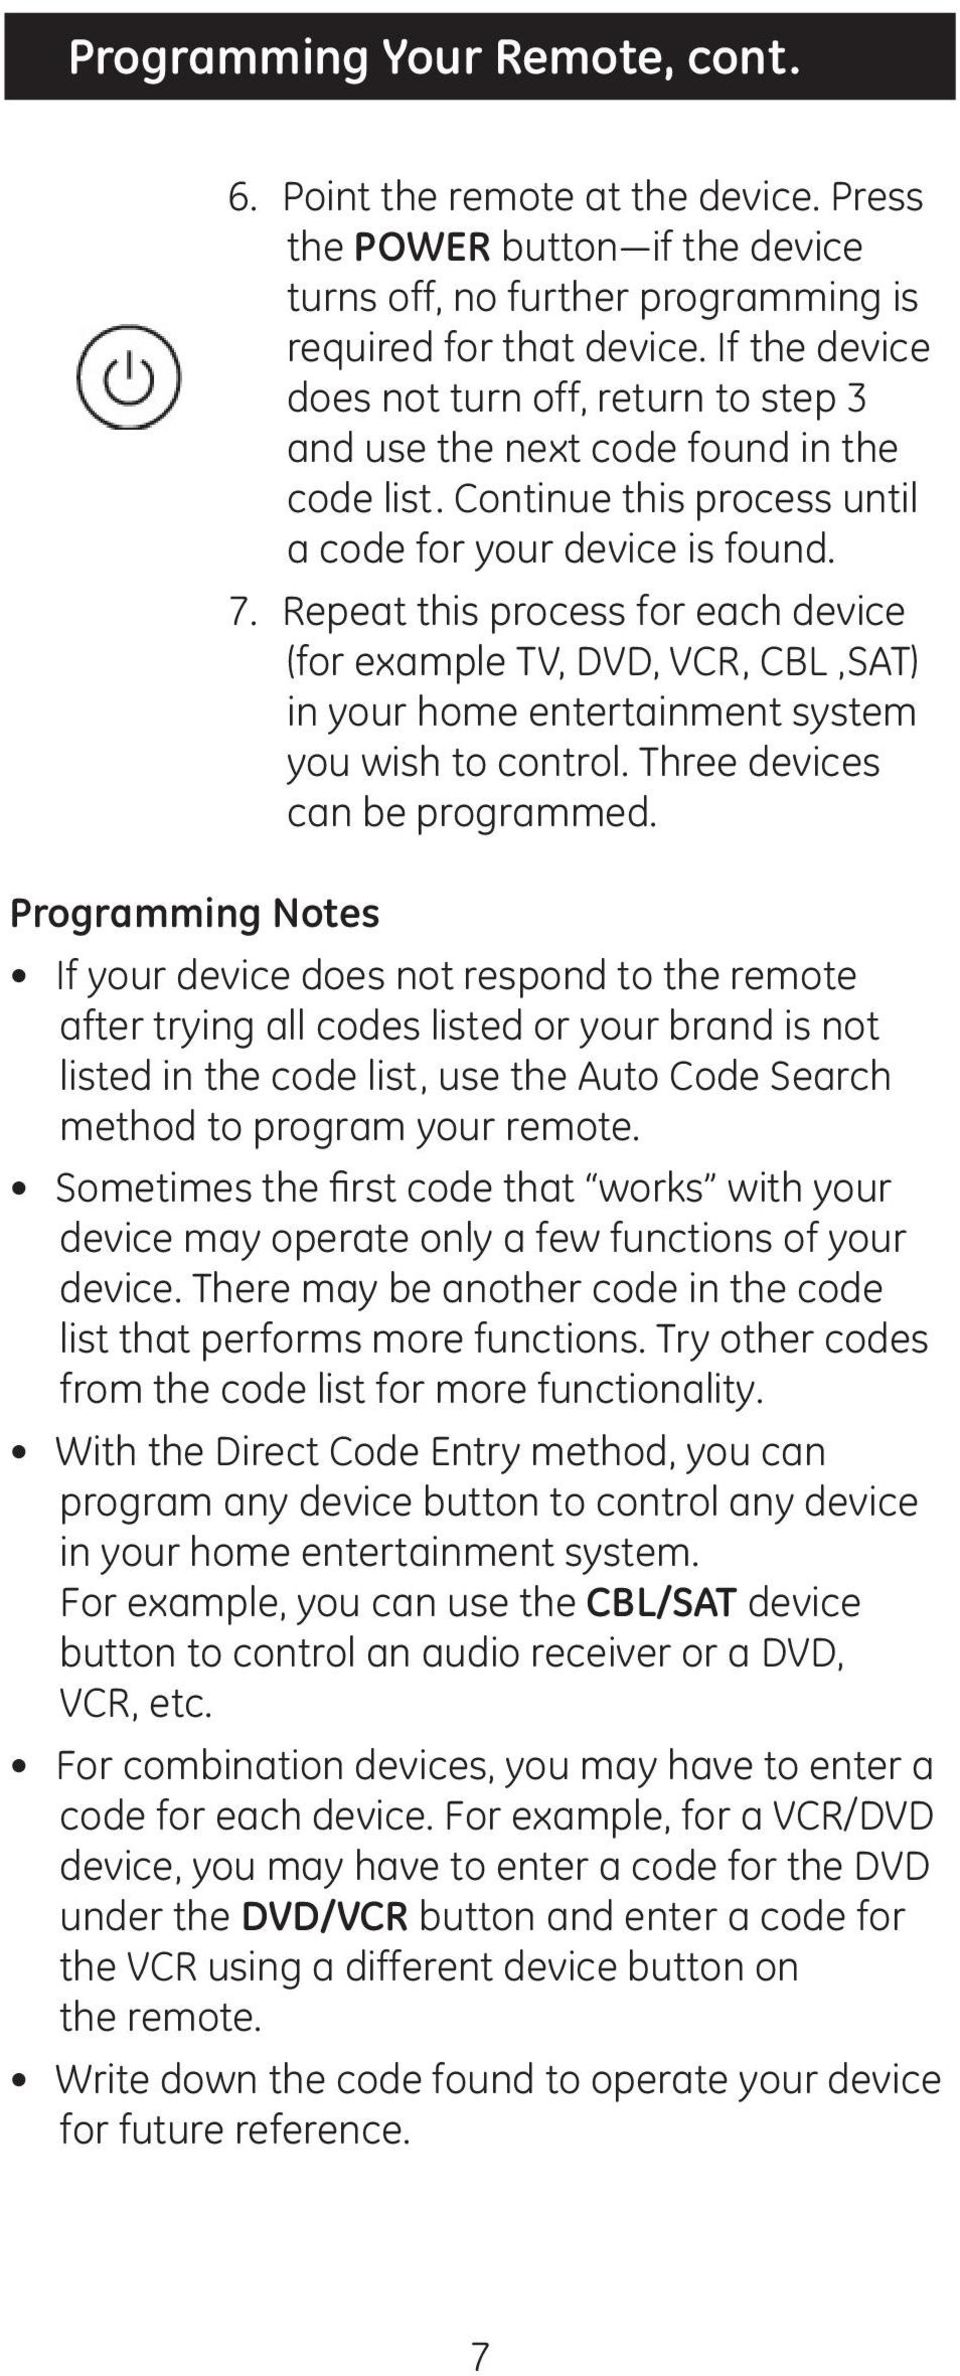 Repeat this process for each device (for example TV, DVD, VCR, CBL,SAT) in your home entertainment system you wish to control. Three devices can be programmed.